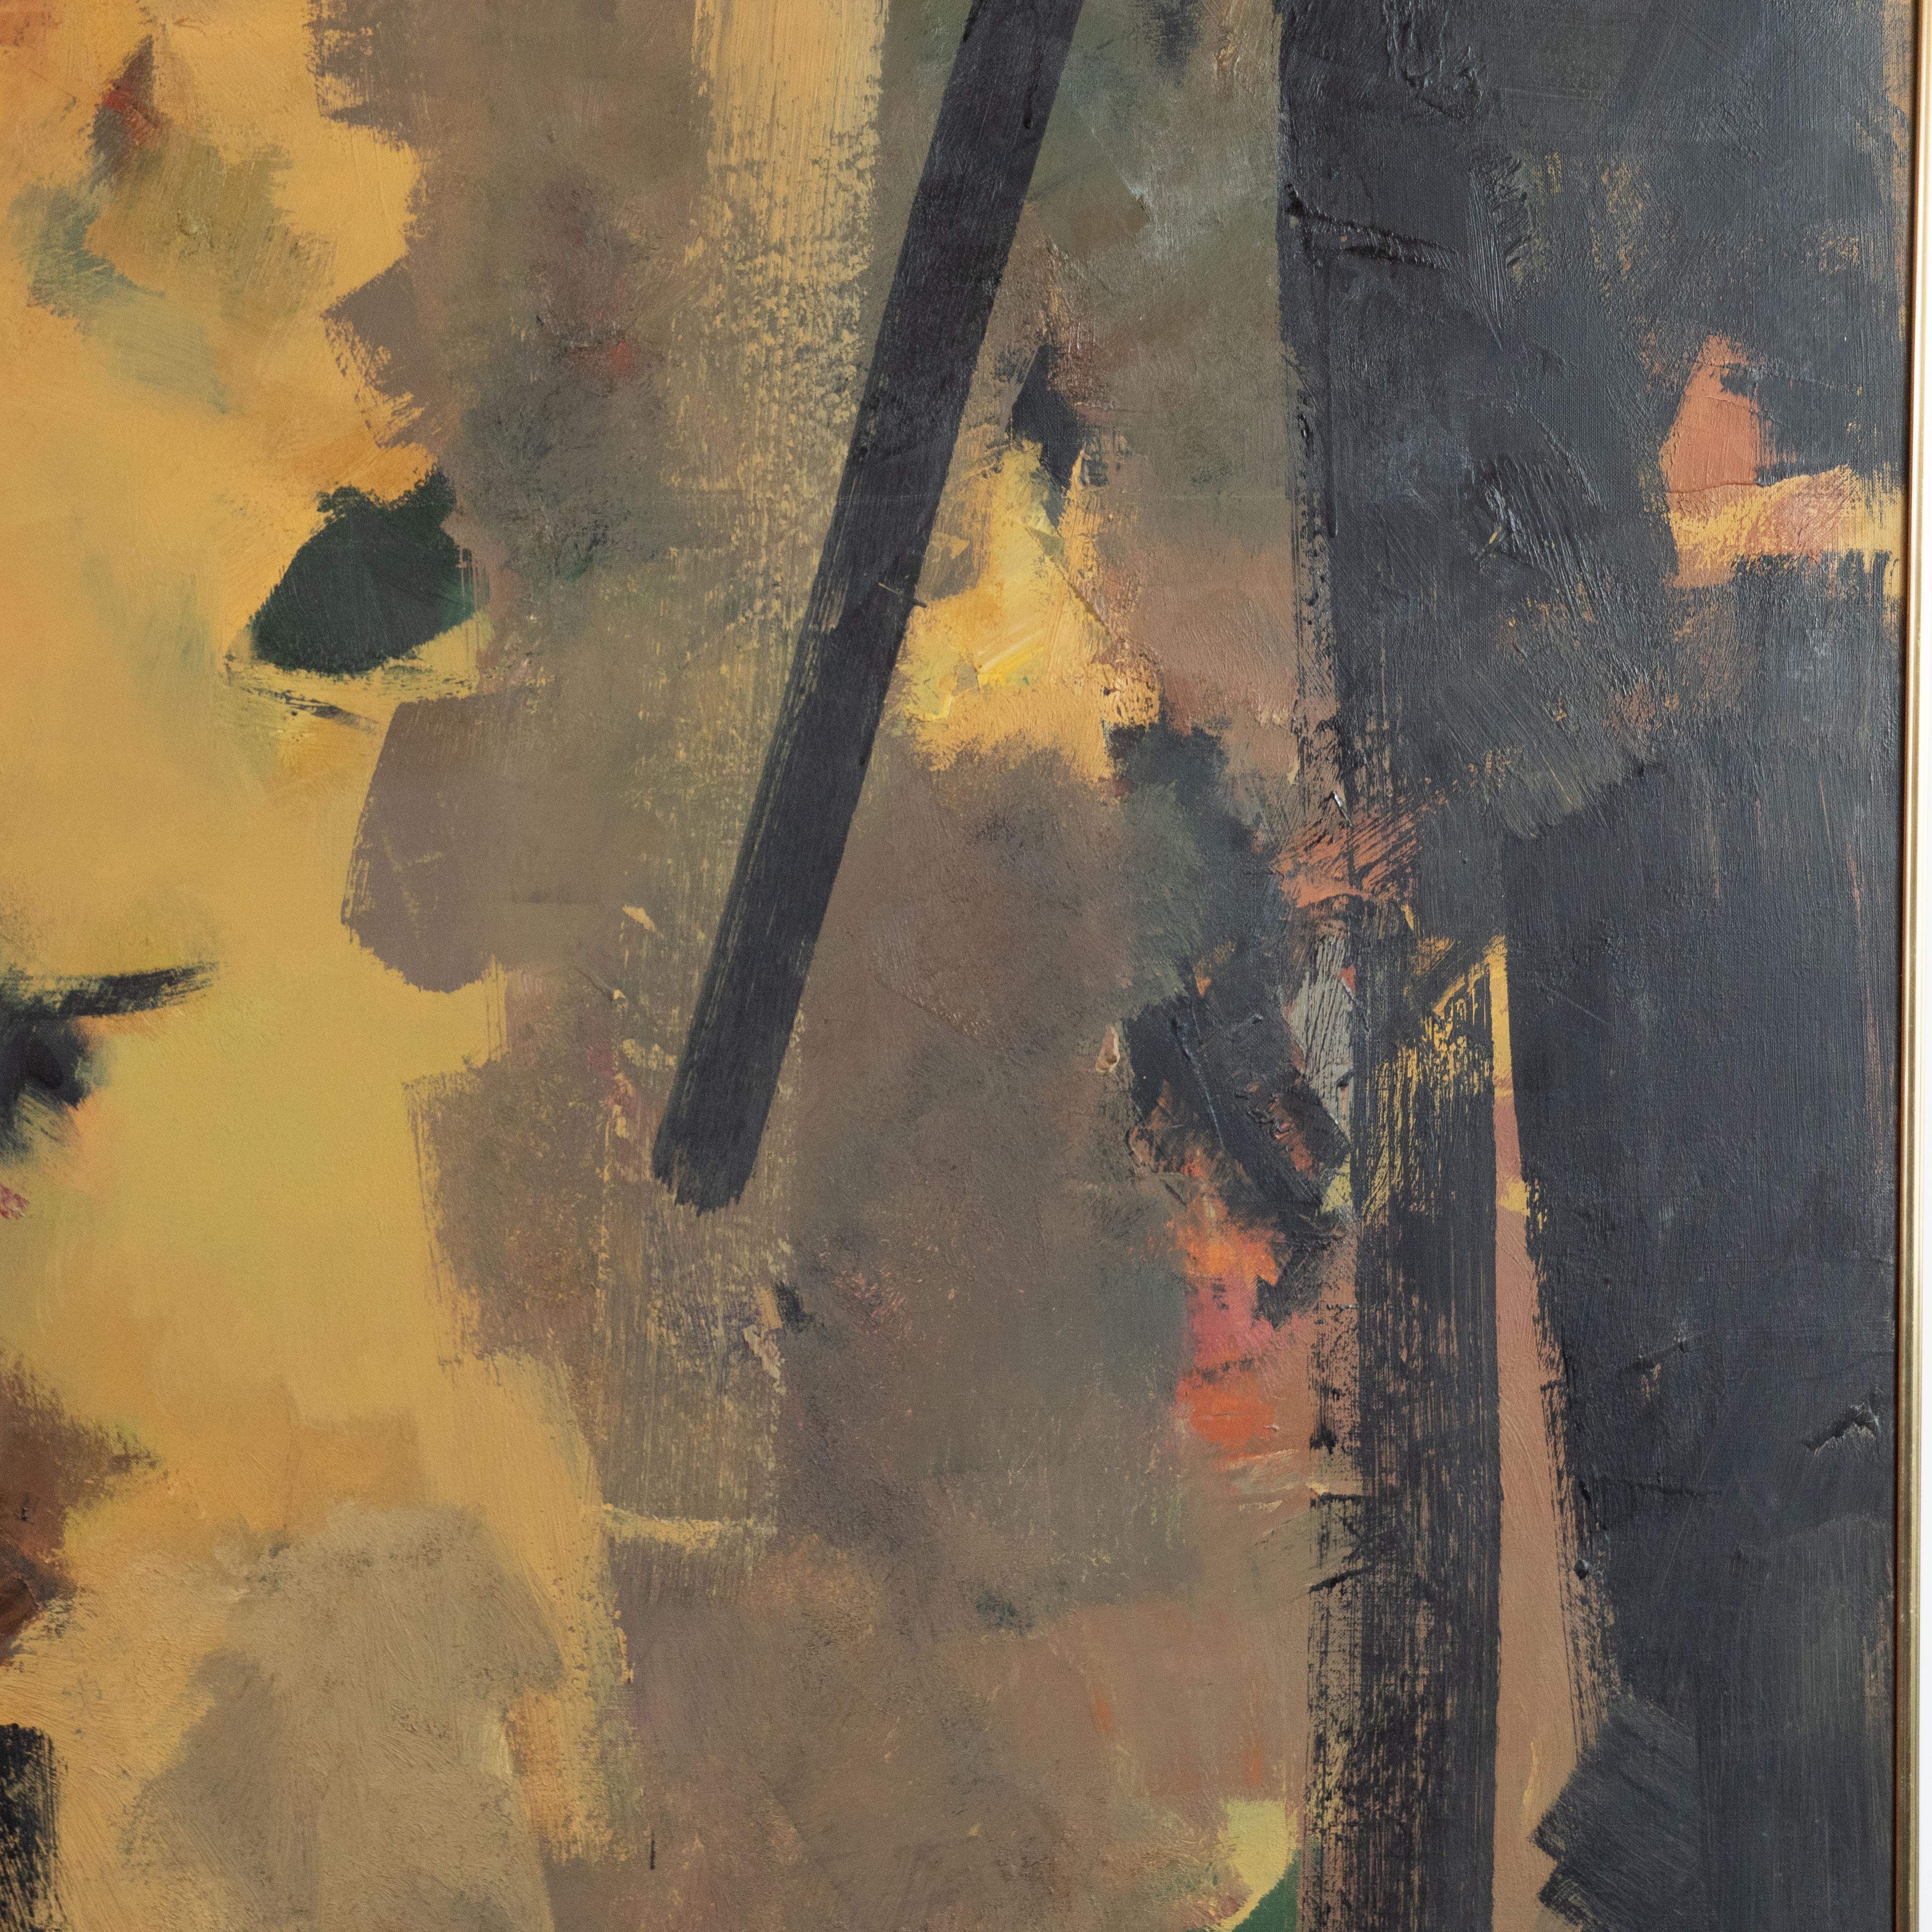 This dynamic and visually compelling abstract expressionist work was painted by the esteemed 20th century artist, Sidney Gross, in 1959. The composition offers a bramble of slashes in black paint- evoking the action paintings of Franz Kline- against